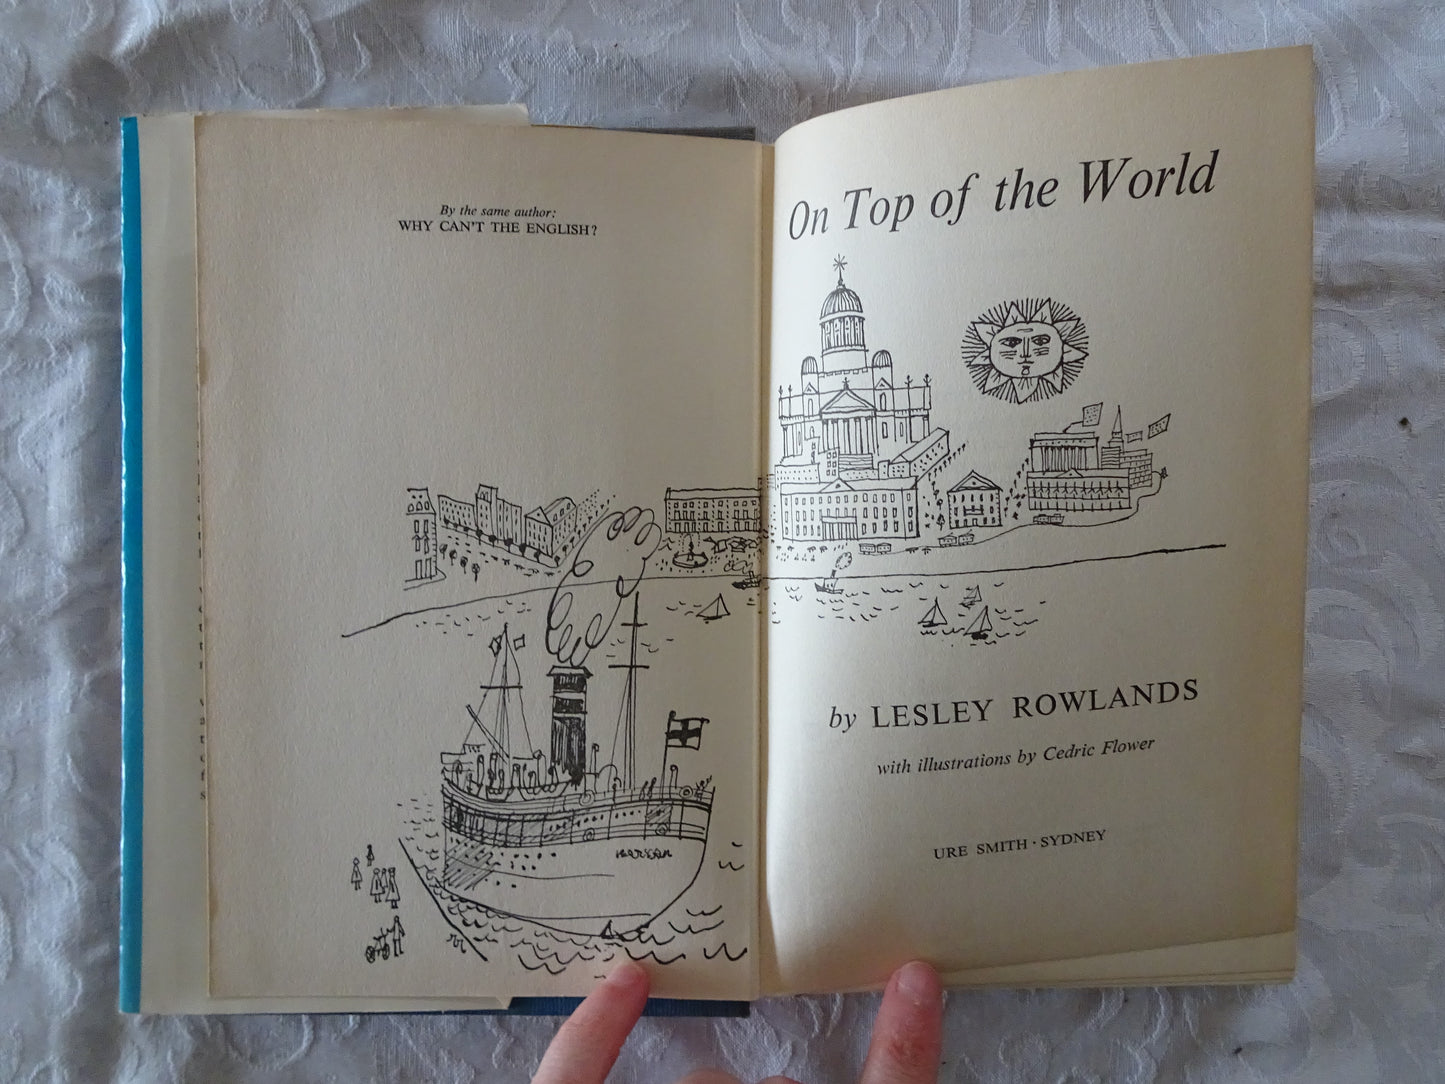 On Top of the World by Lesley Rowlands